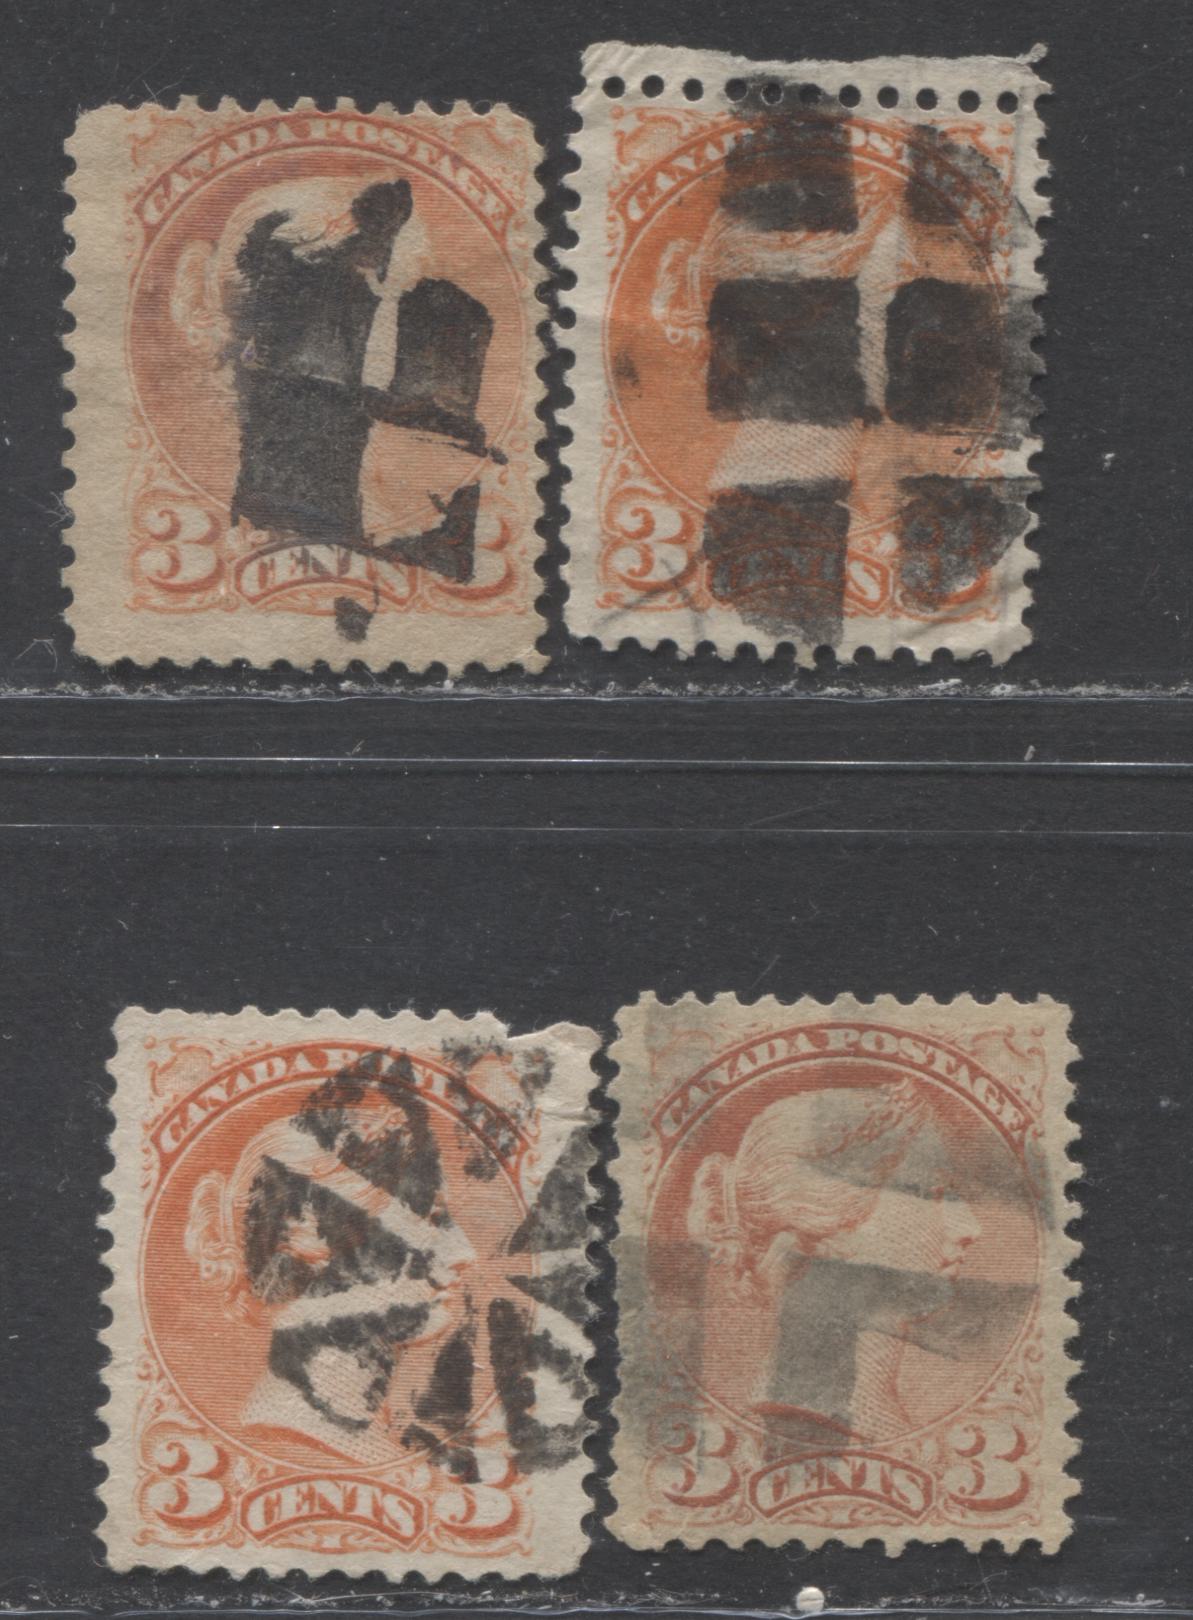 Lot 111 Canada #37, 41 3c Orange Red and Orange Vermillion Queen Victoria, 1870-1897 Small Queen Issue, Four VG Used Examples Montreal and Second Ottawa, Various Perfs, Stout and Soft Horizontal Wove, With Better Fancy Geometric Cork Cancels